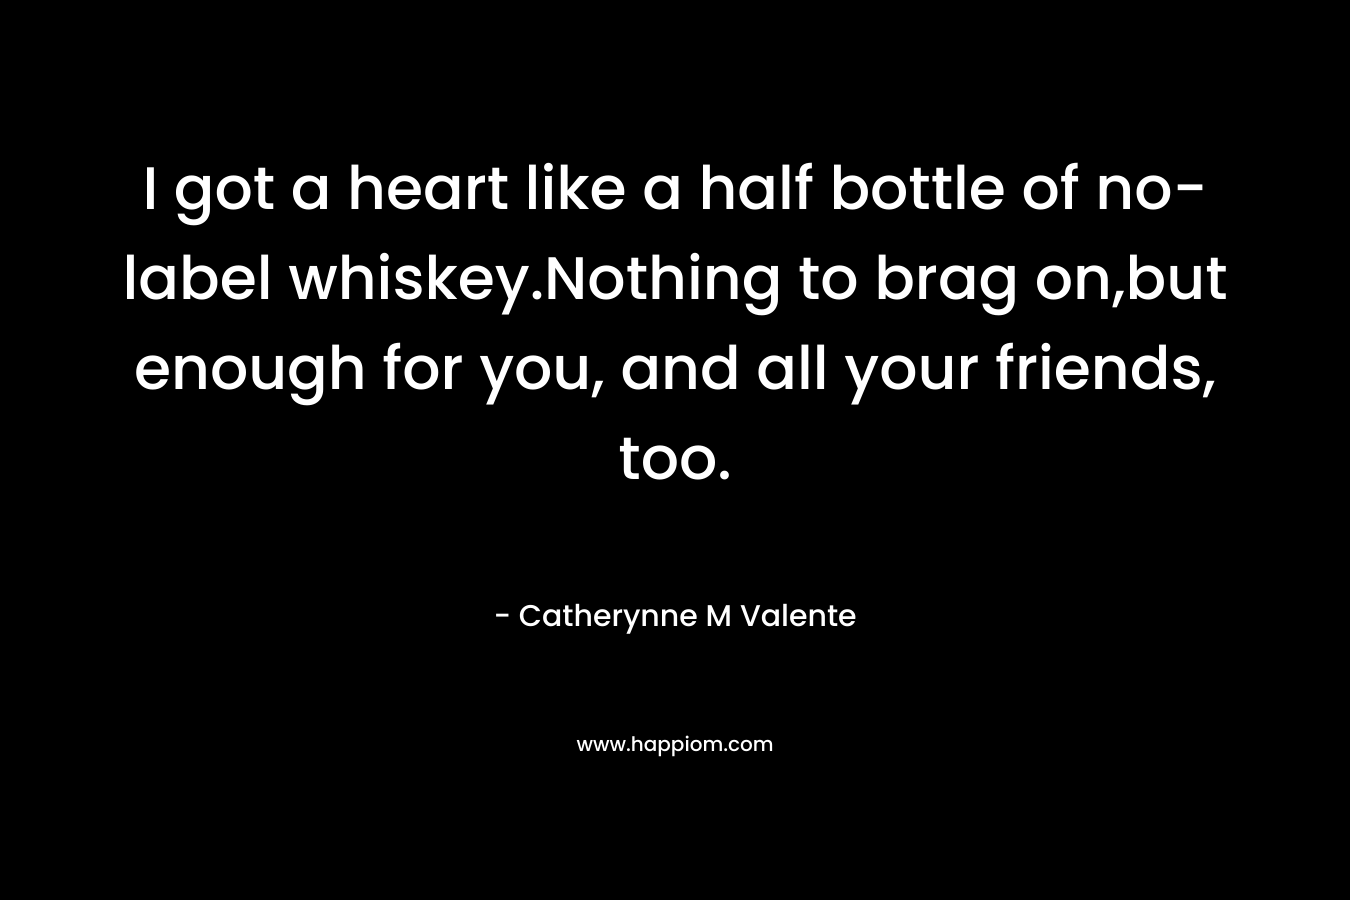 I got a heart like a half bottle of no-label whiskey.Nothing to brag on,but enough for you, and all your friends, too.